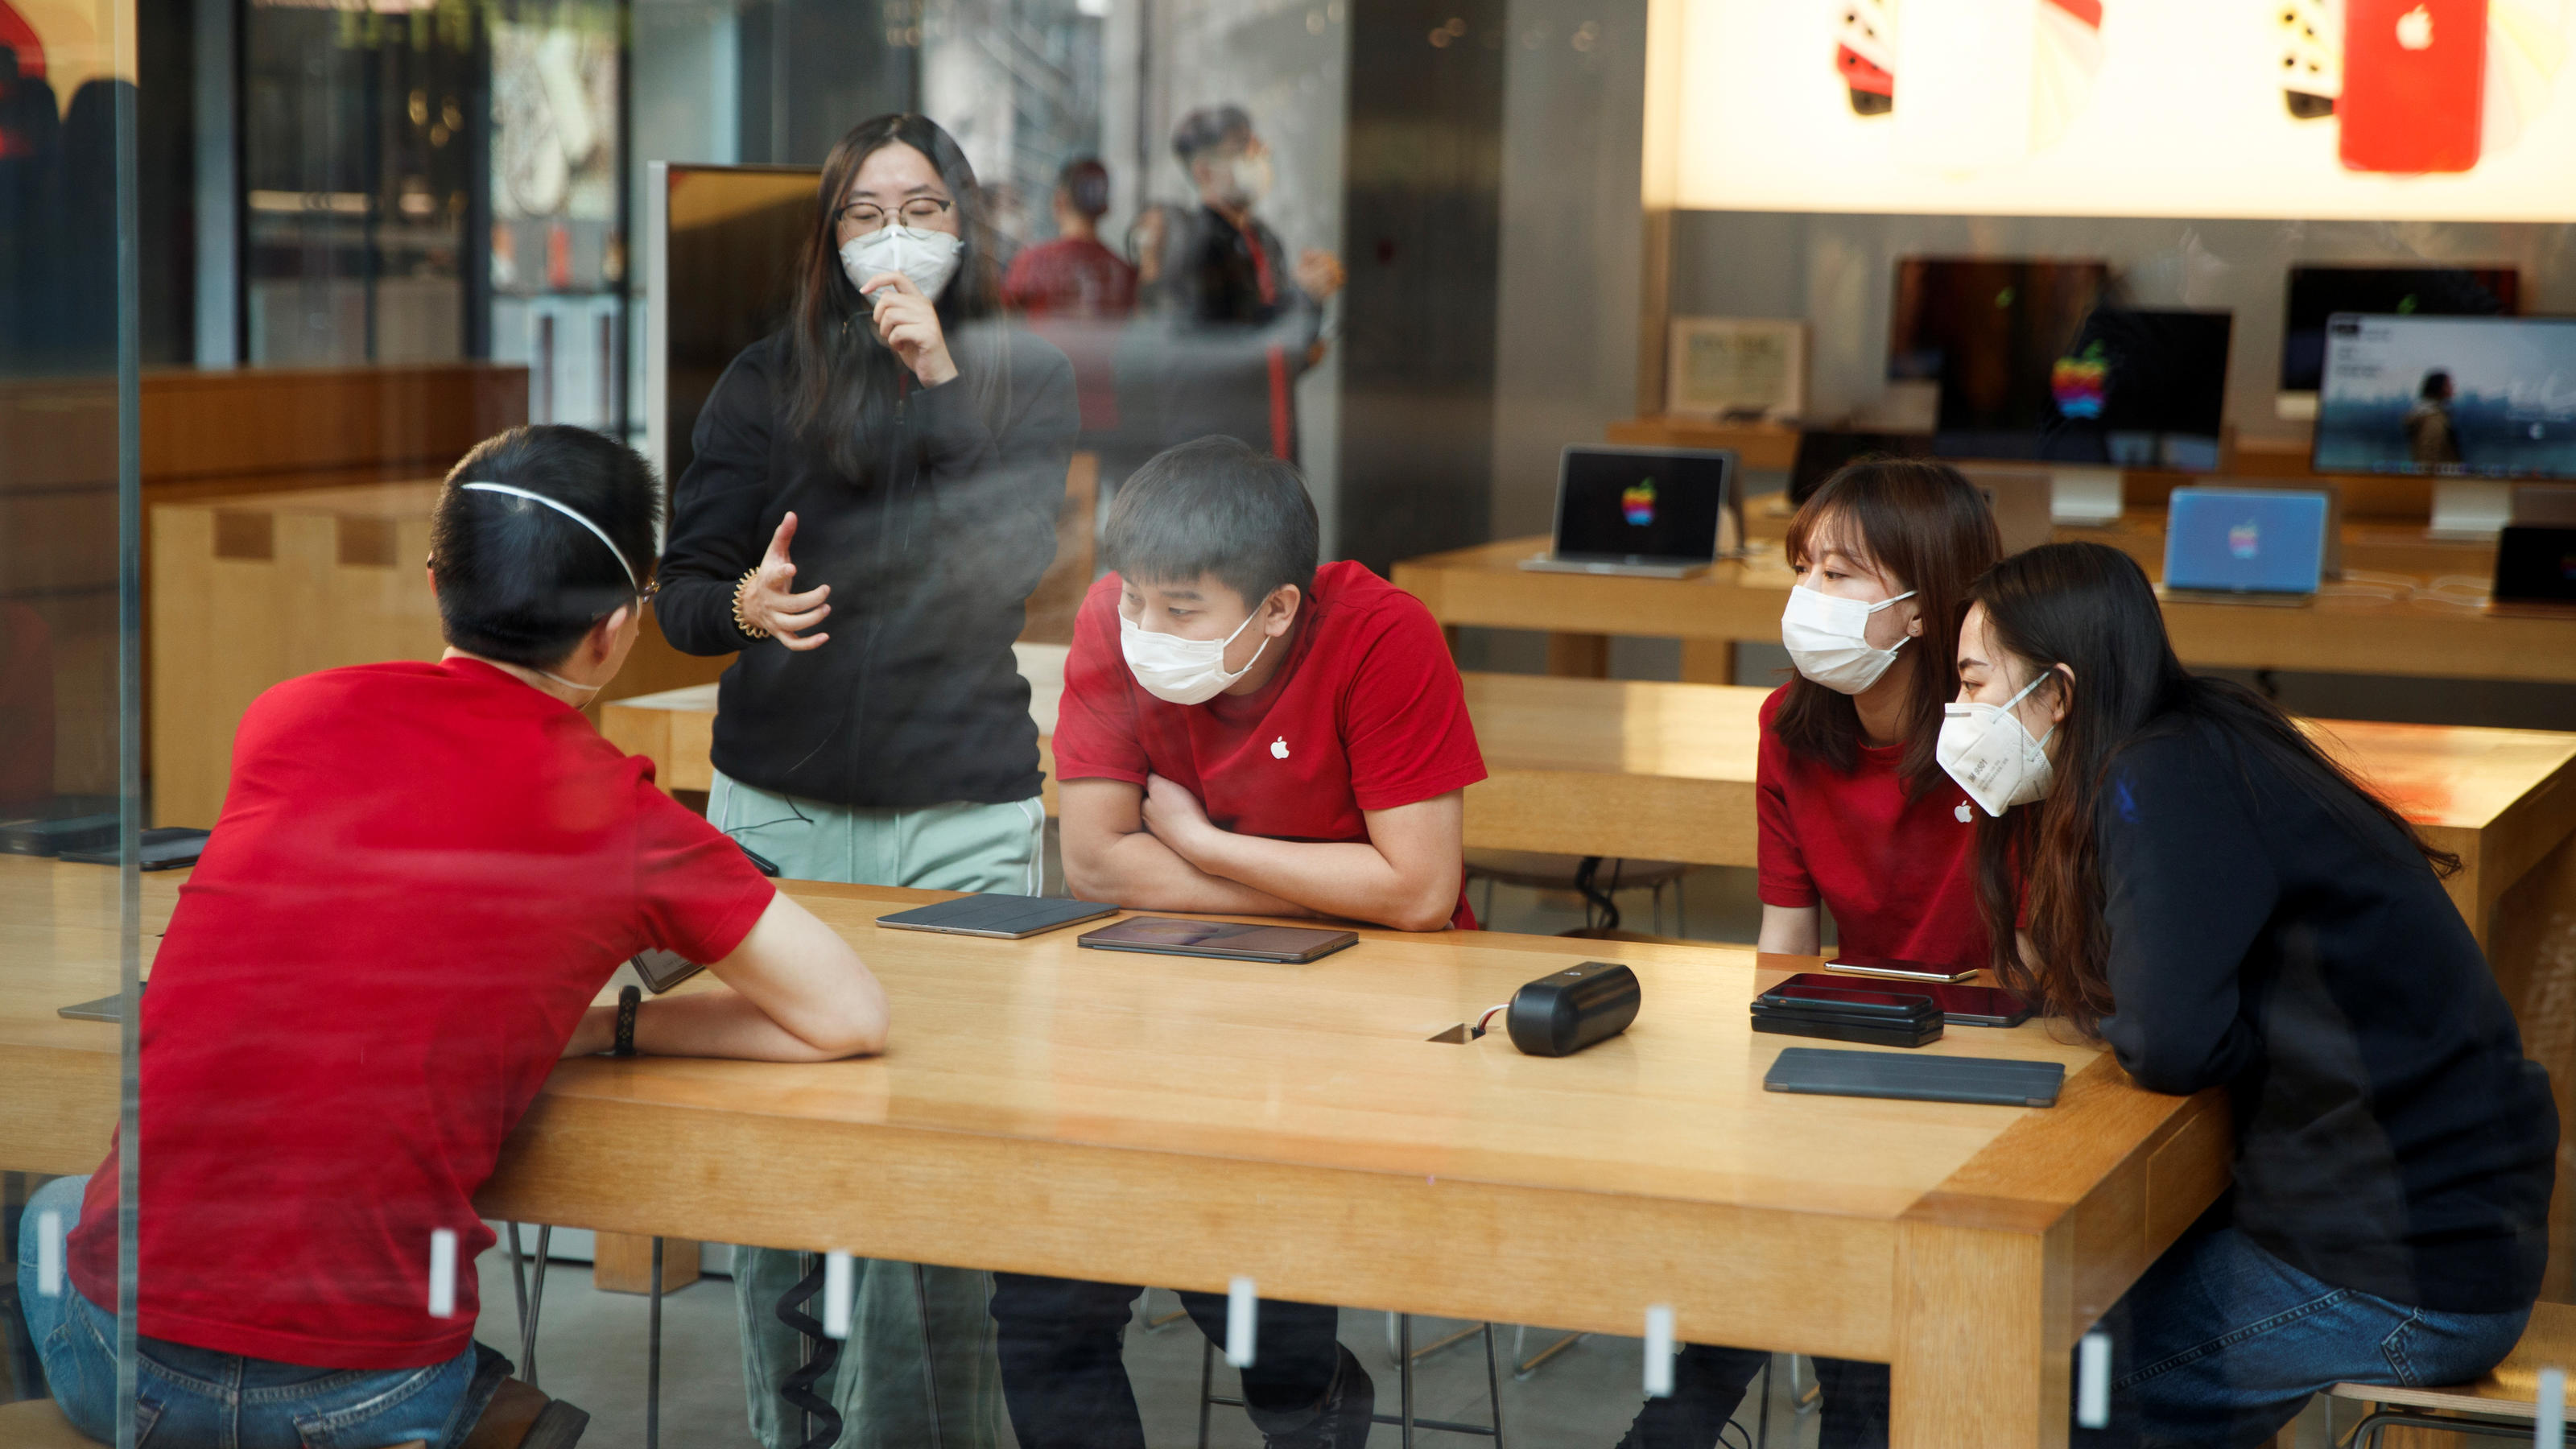 People wear face masks as they listen to a presentation in an Apple Store in the Sanlitun shopping district in Beijing as China is hit by an outbreak of the new coronavirus, January 25, 2020. Picture taken January 25, 2020.   REUTERS/Thomas Peter